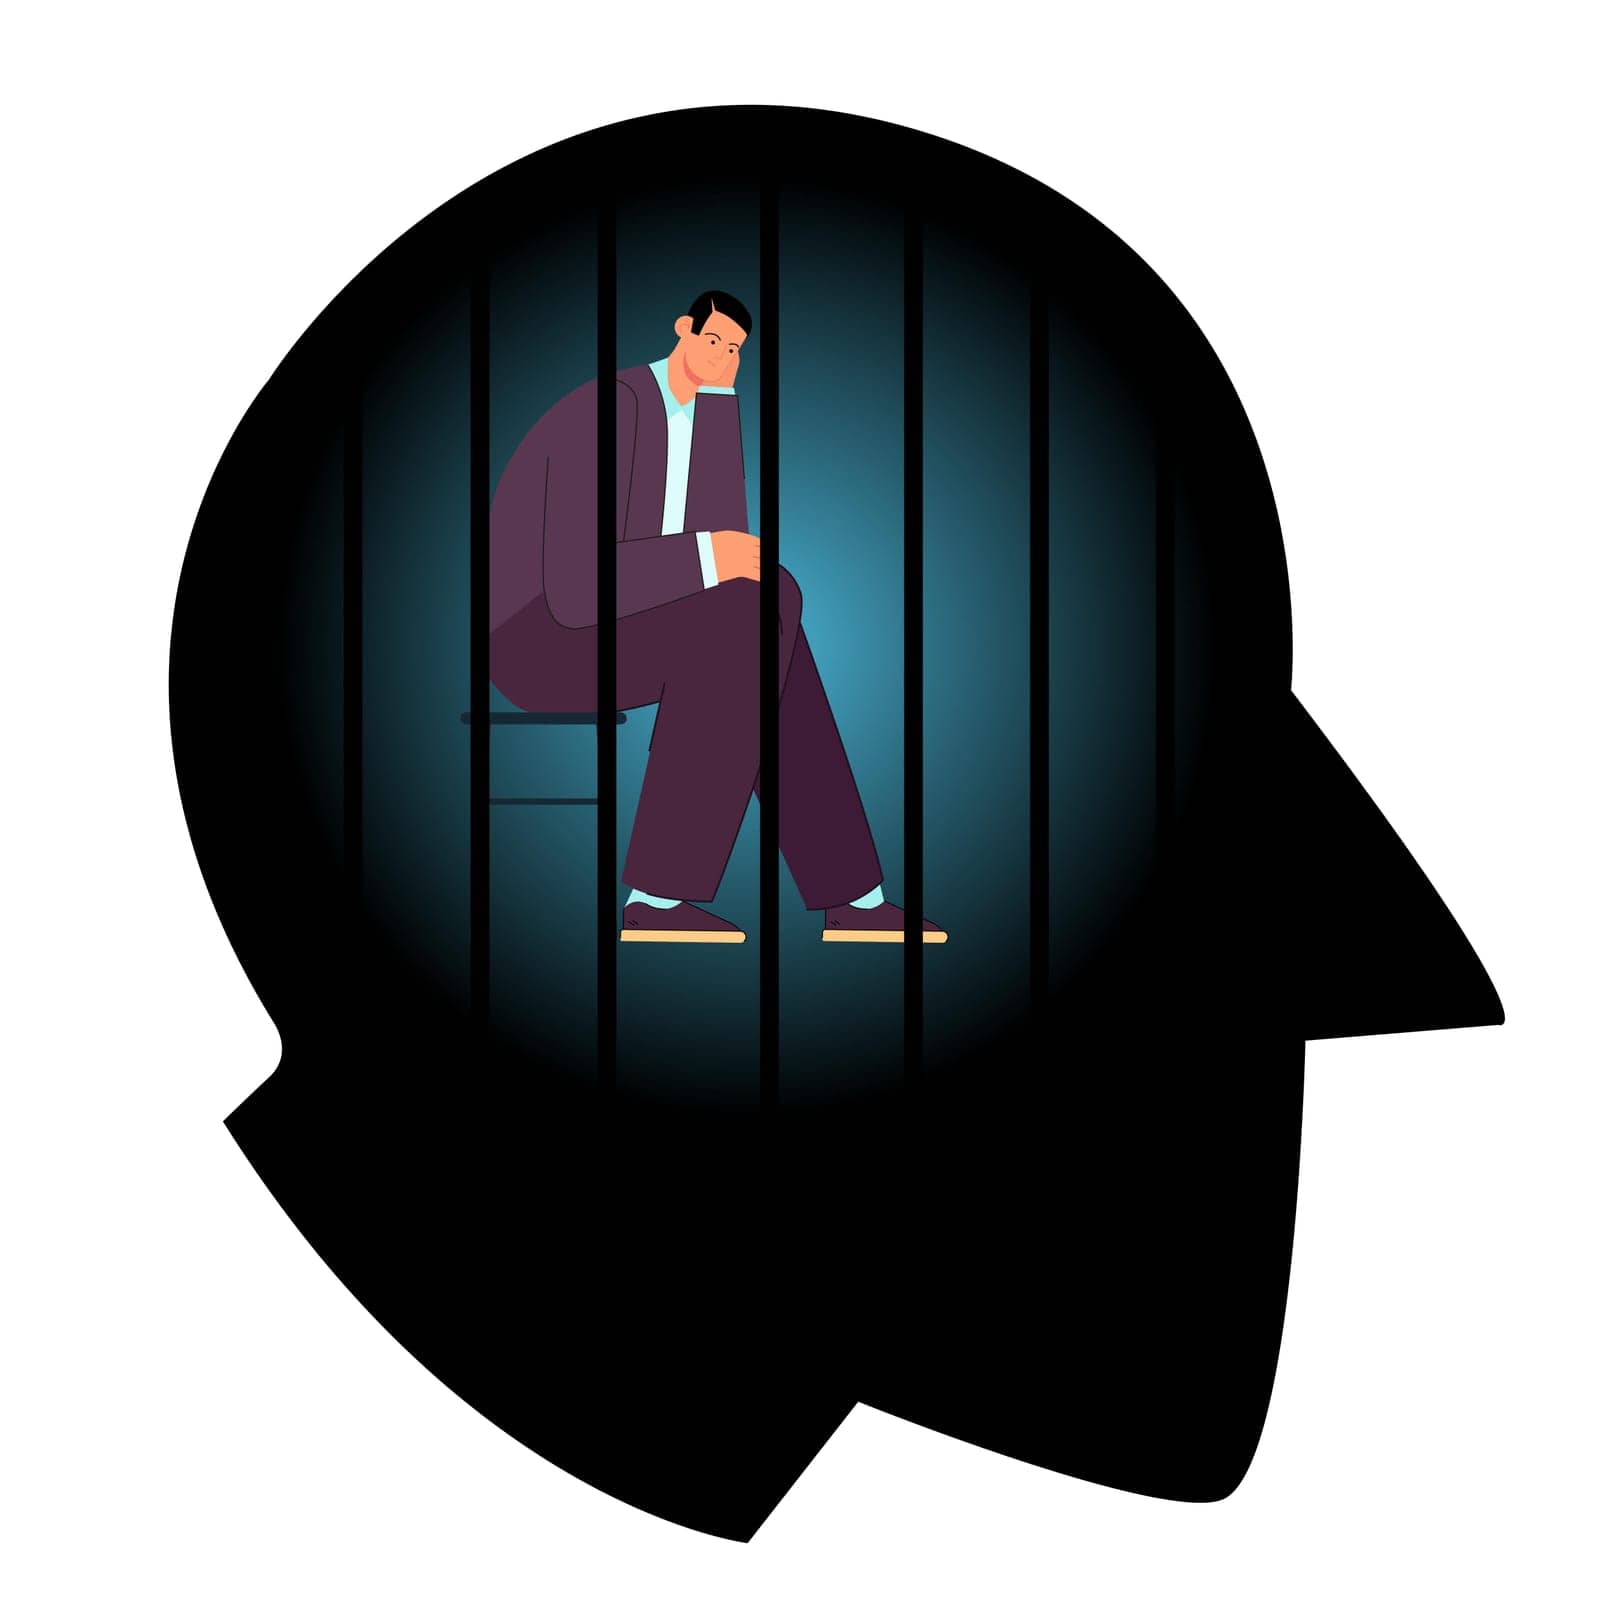 Powerless man with depression in prison of mind by pchvector